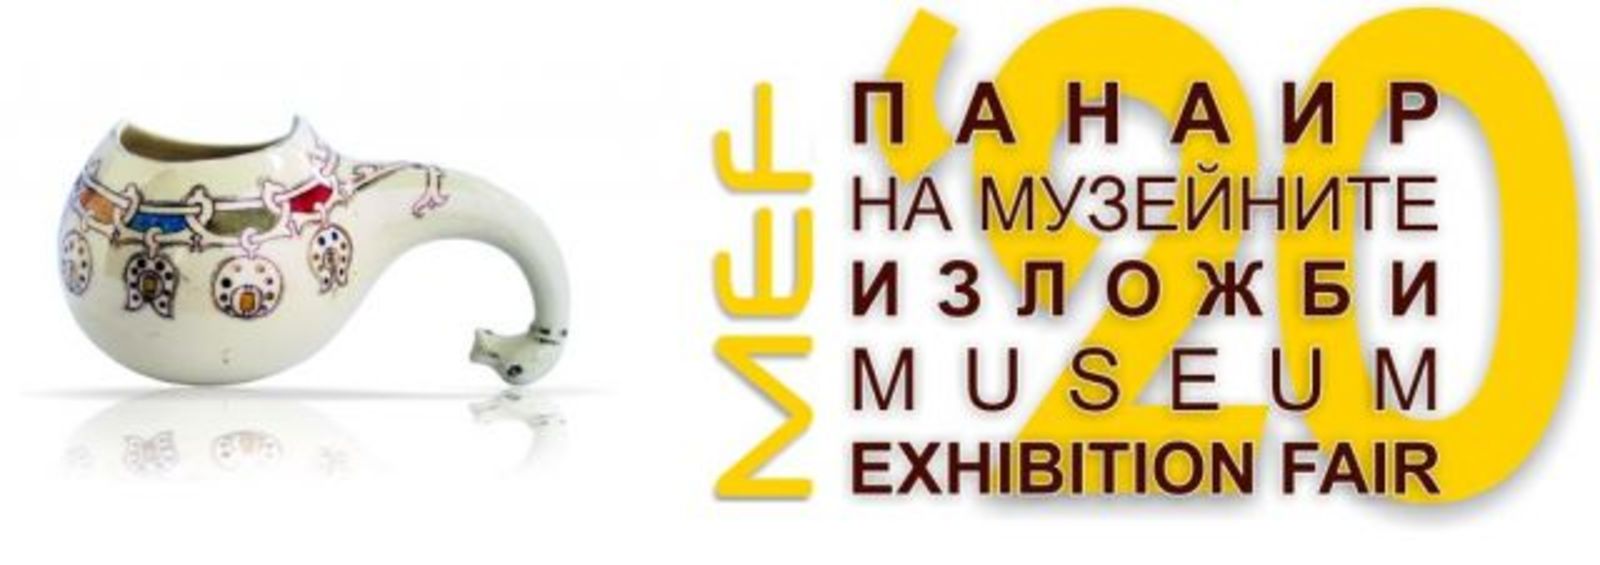 THE STATE INSTITUTE FOR CULTURE PARTICIPATES ONLINE IN THE NATIONAL EDITION OF THE RUSE MUSEUM EXHIBITIONS FAIR